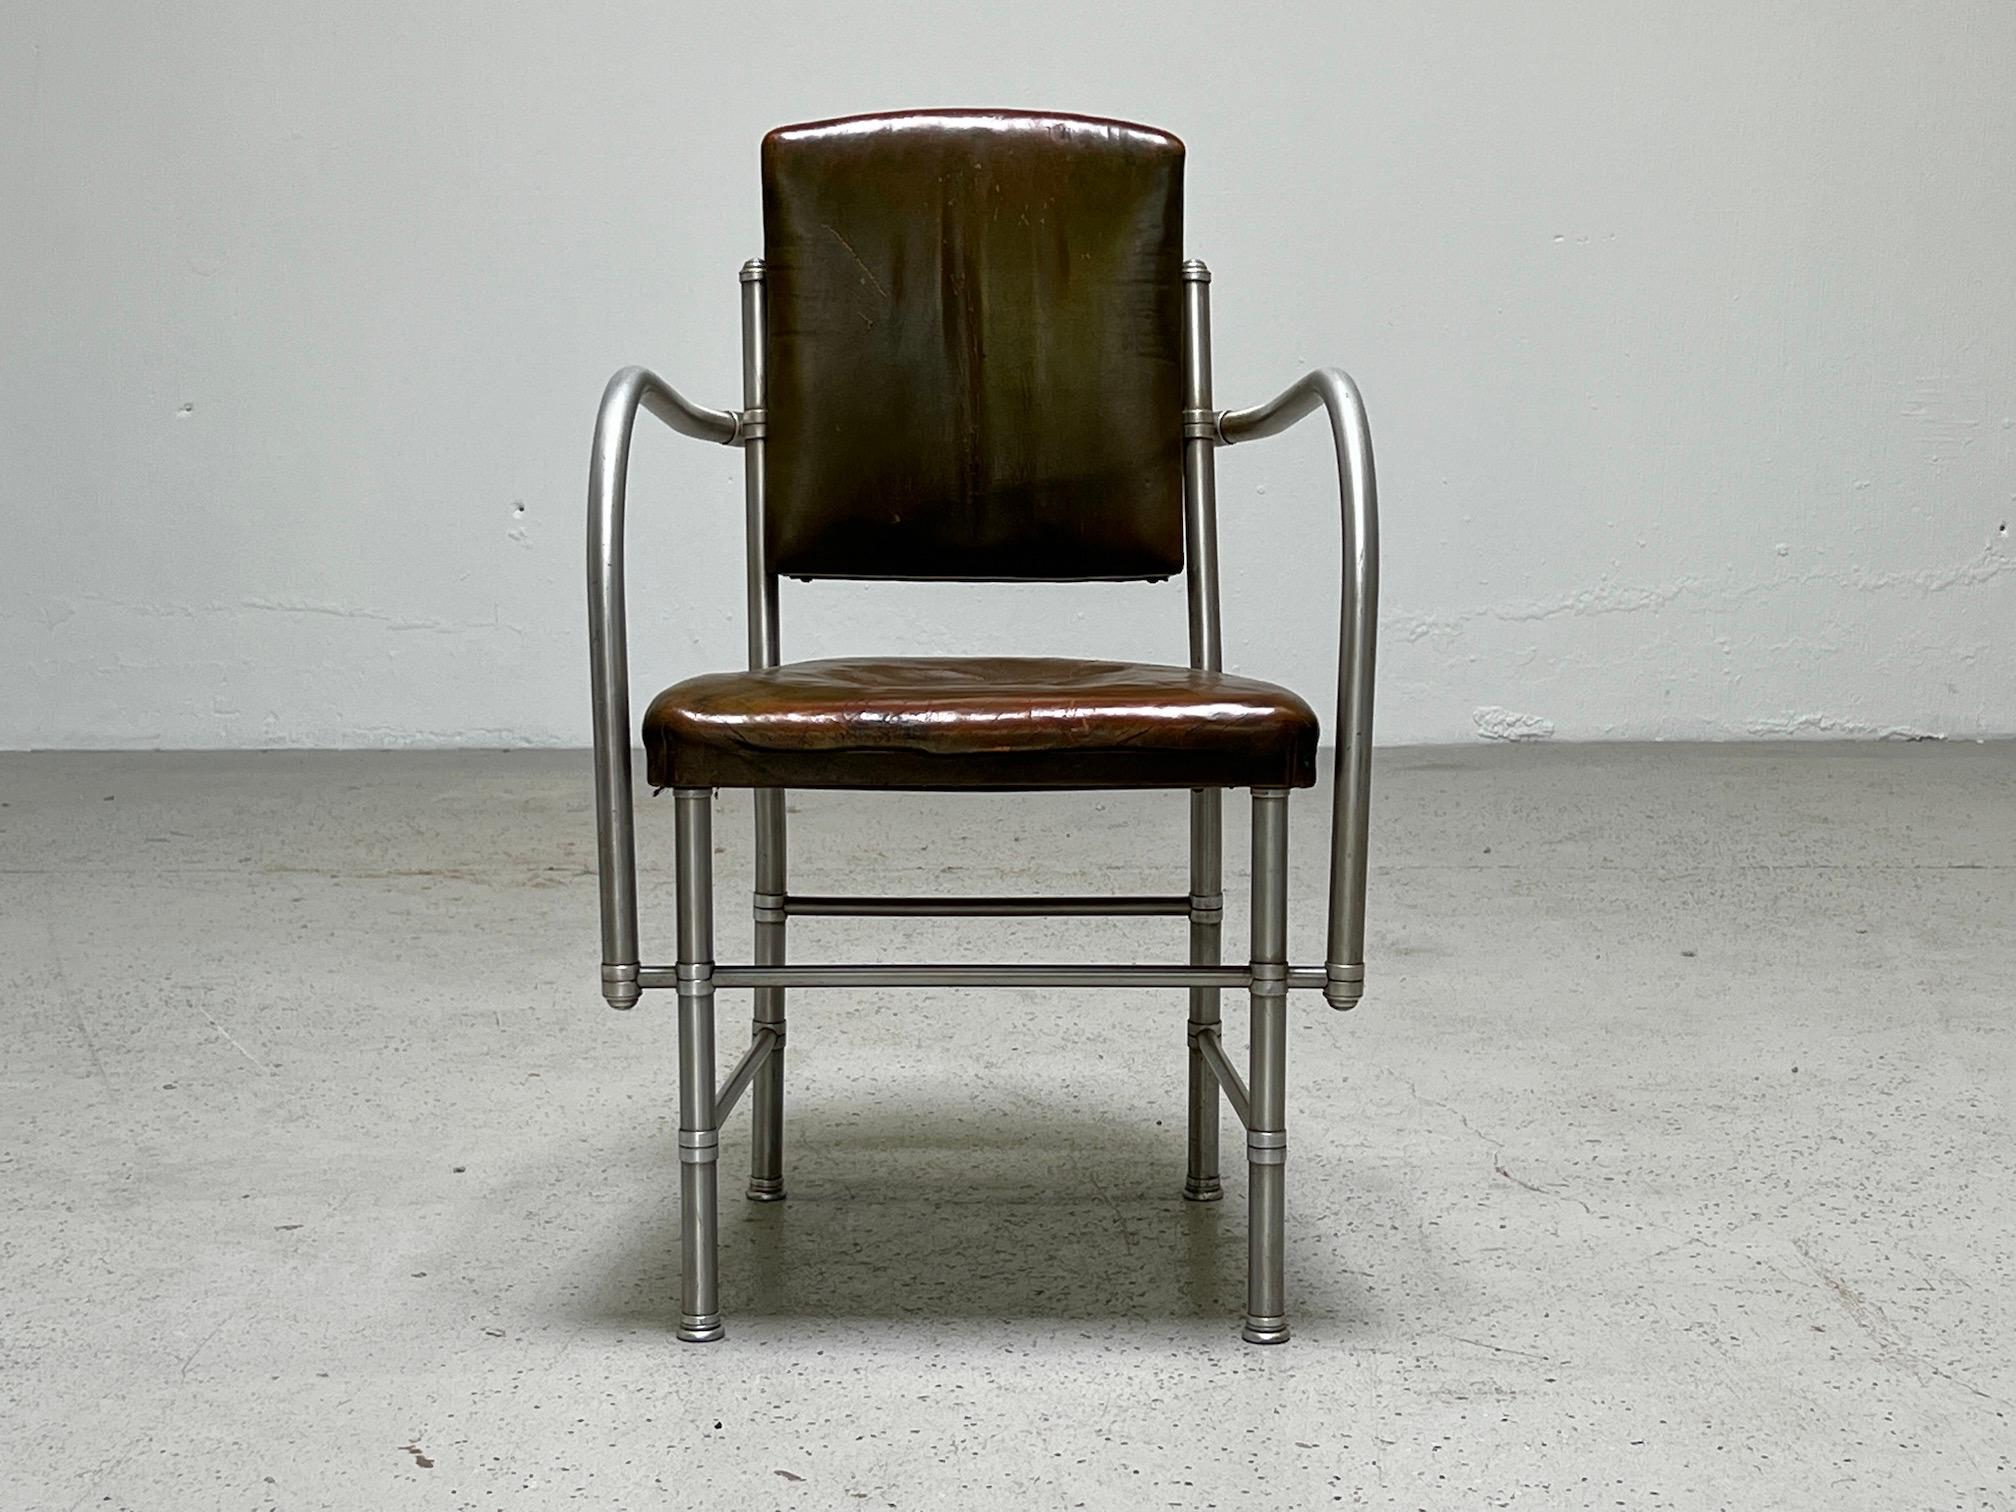 A beautifully patinated leather and aluminum armchair designed by Warren McArthur, 1930's.